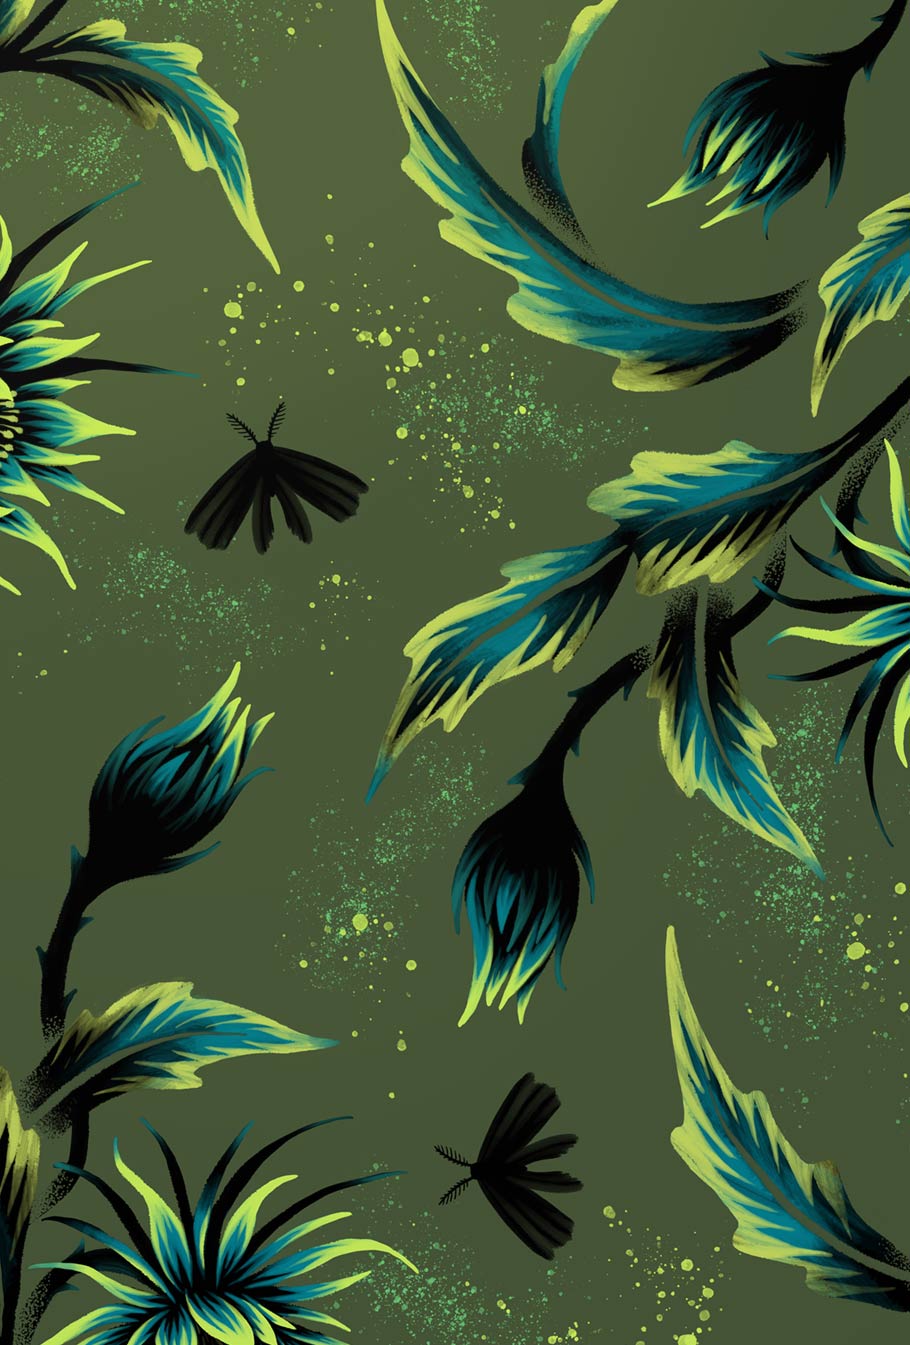 Detail of floral illustration green buds by Andrea Muller